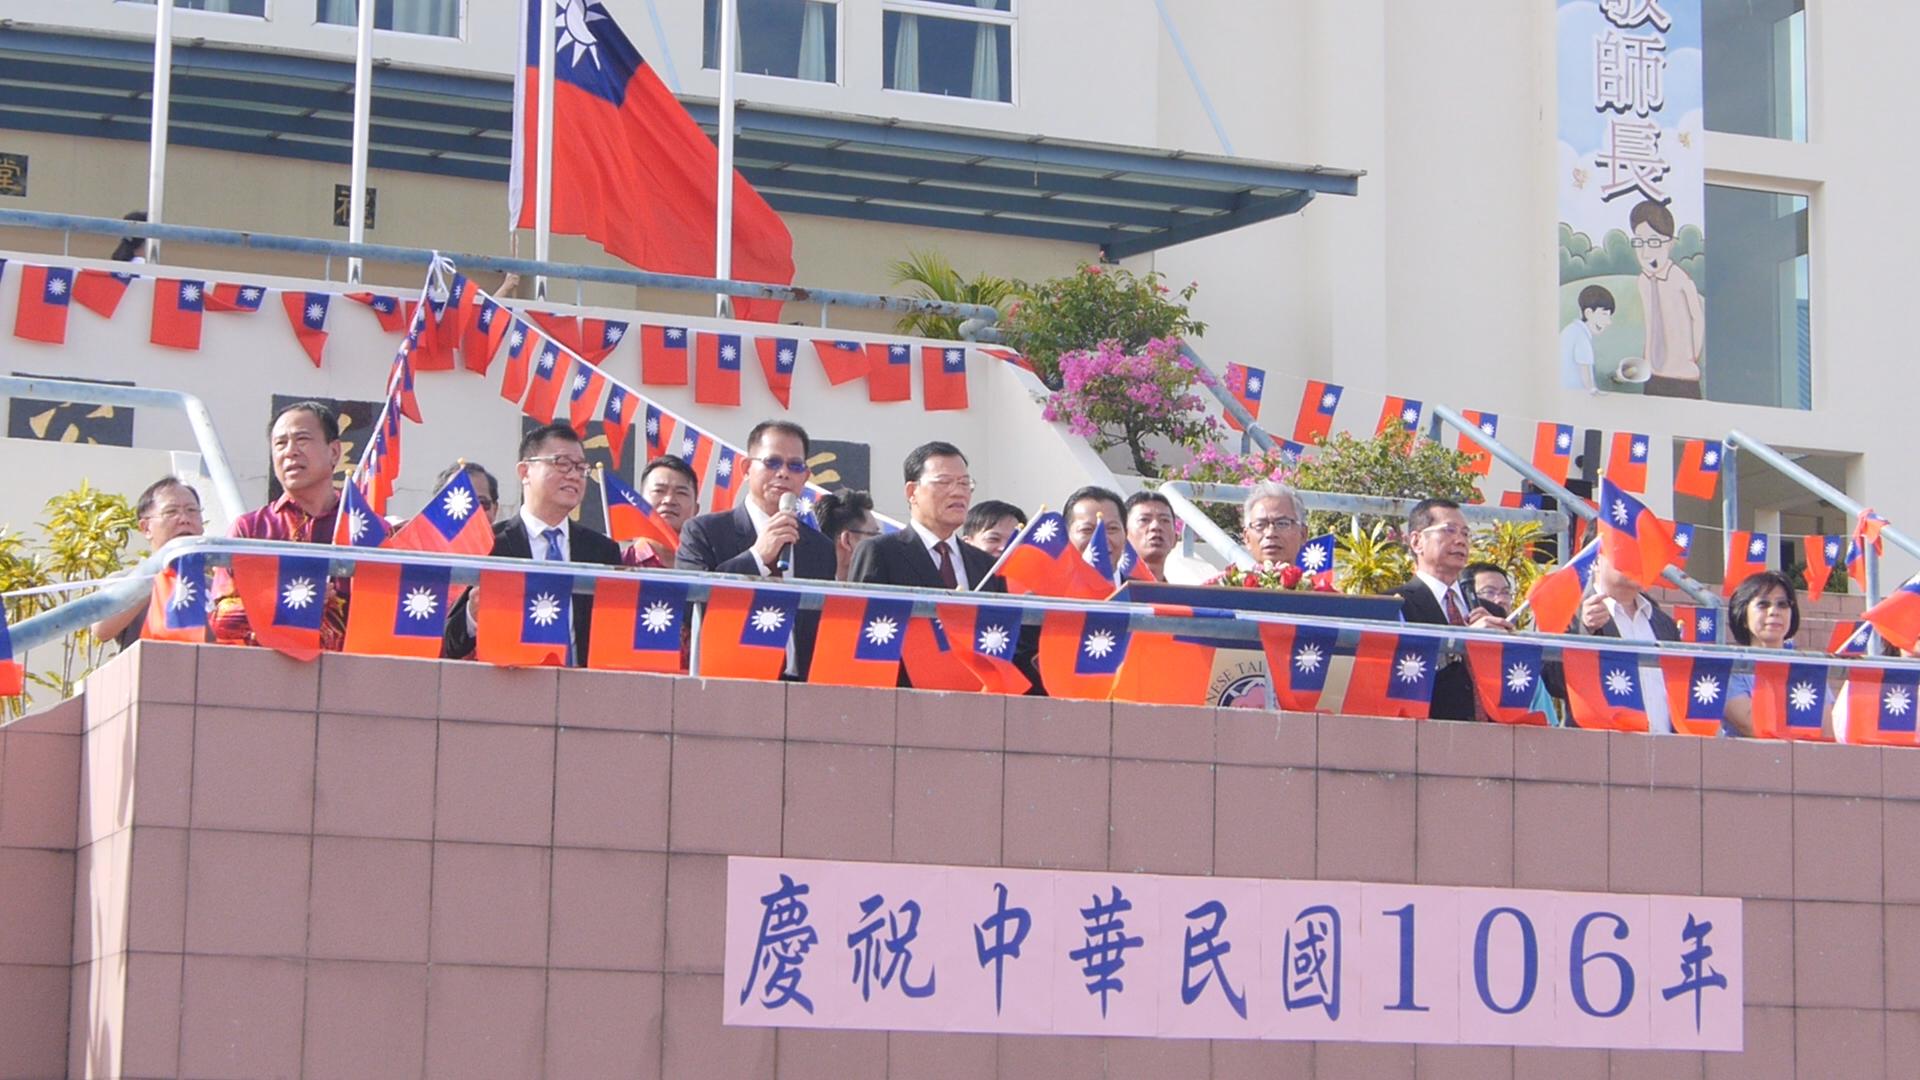 Representative Chang, James Chi-Ping(4th from left) attended the Flag Raising Ceremony held by the Chinese Taipei School,Kuala Lumpur to celebate the 106th anniversary of the Republic of China(Taiwan) on January 1th , 2017.